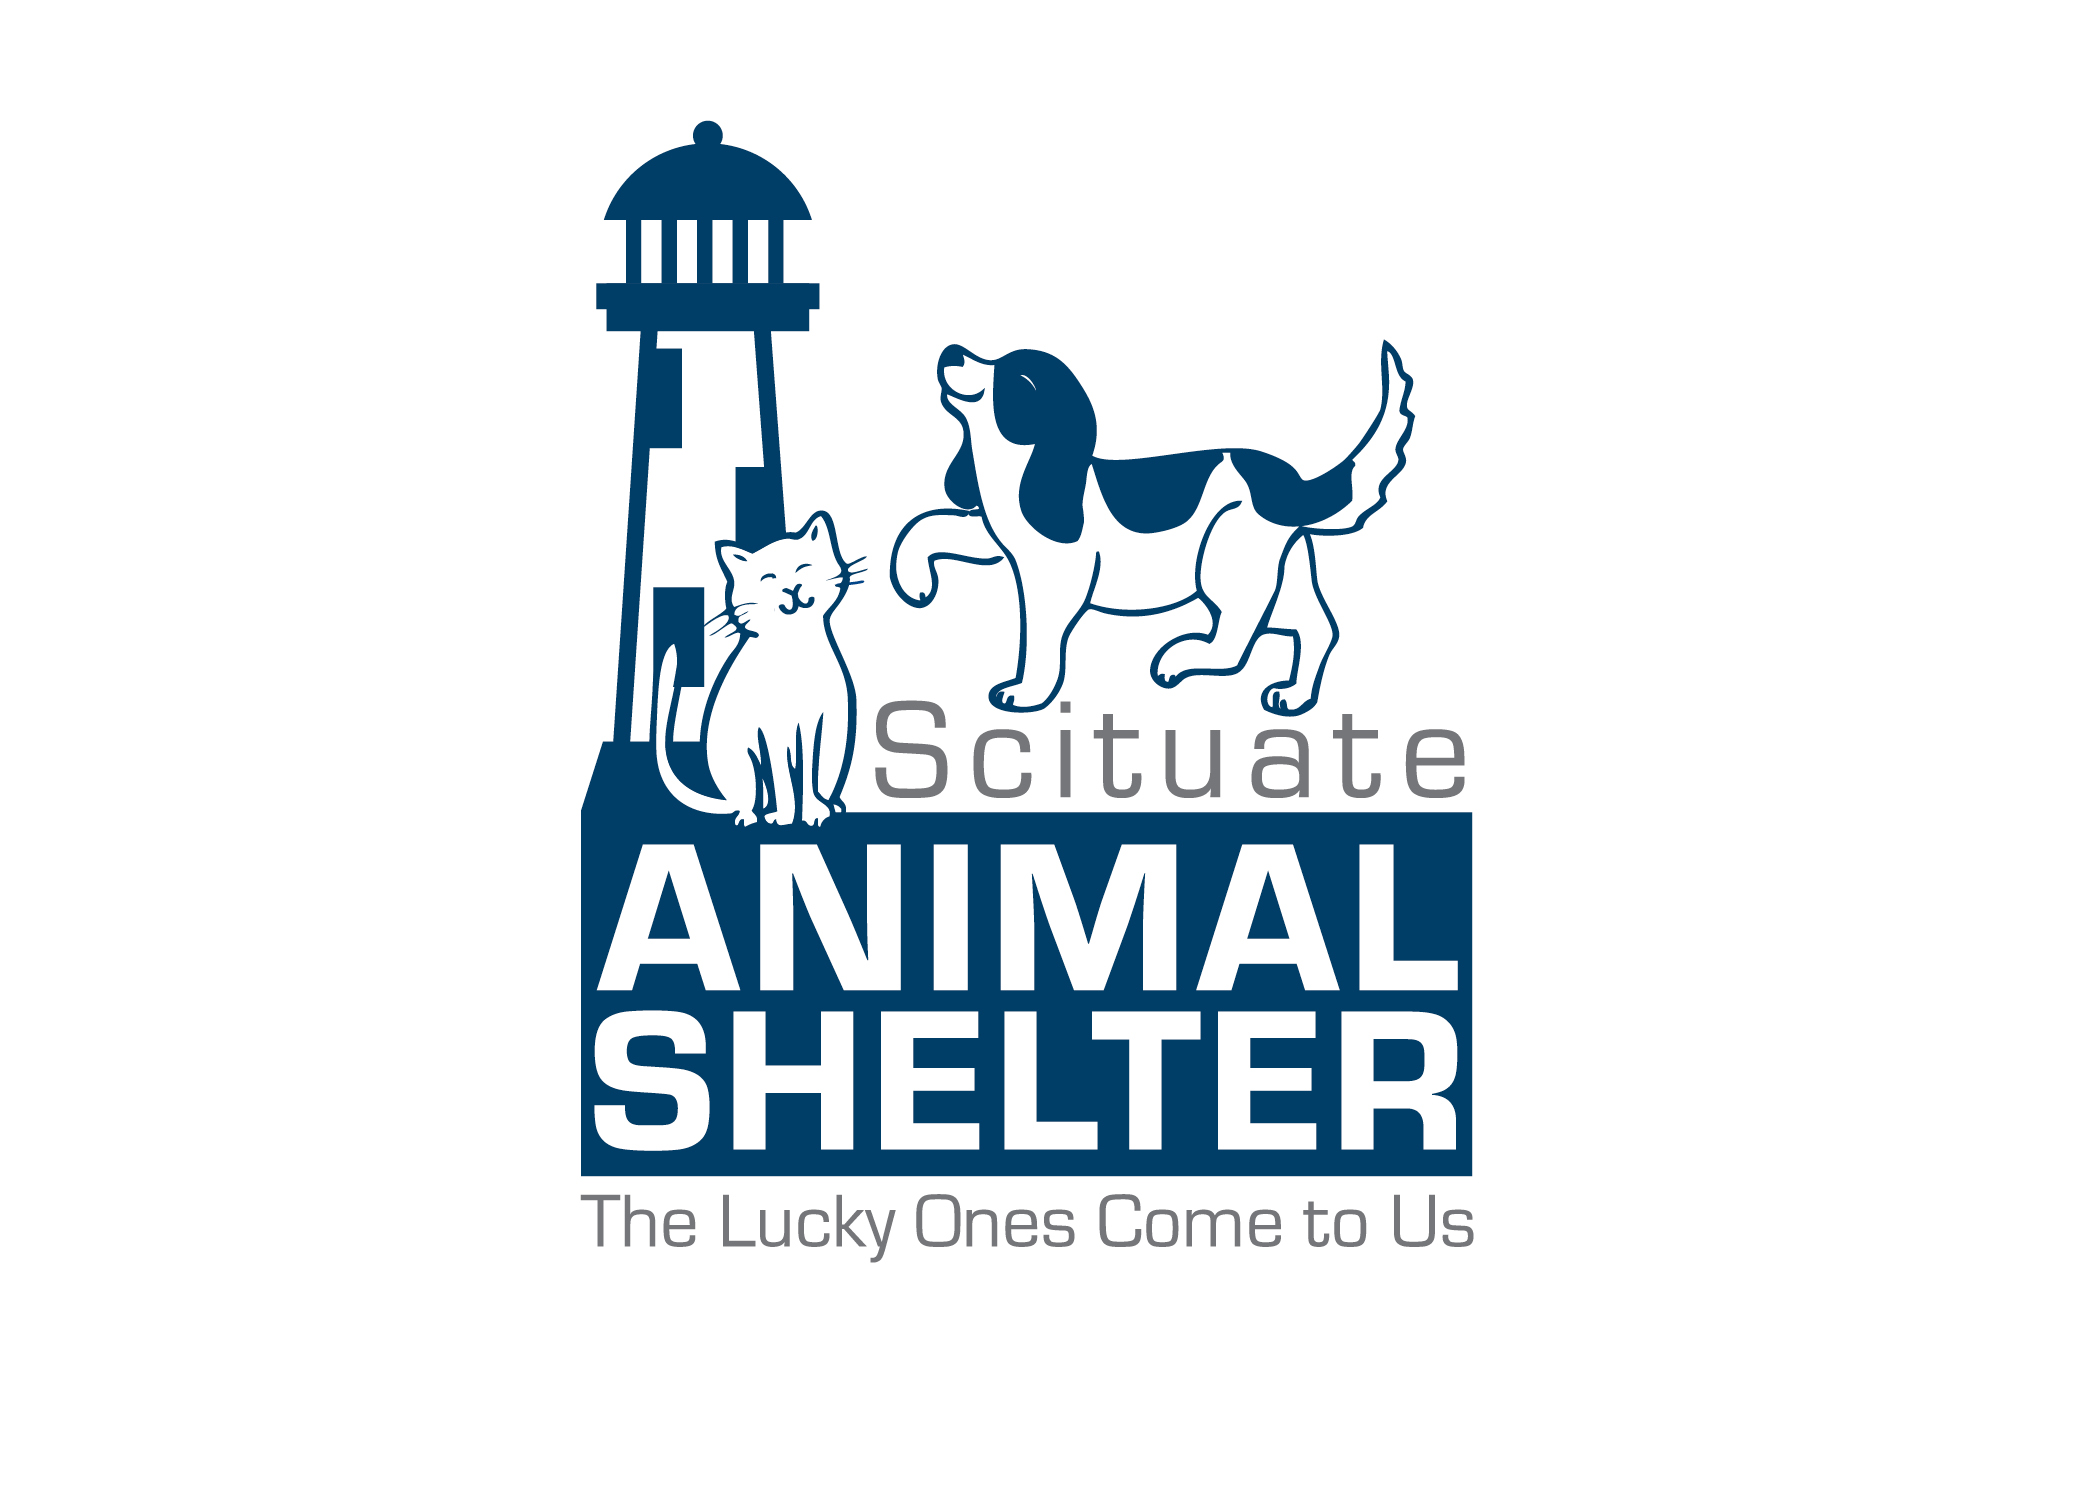 Scituate Animal Shelter